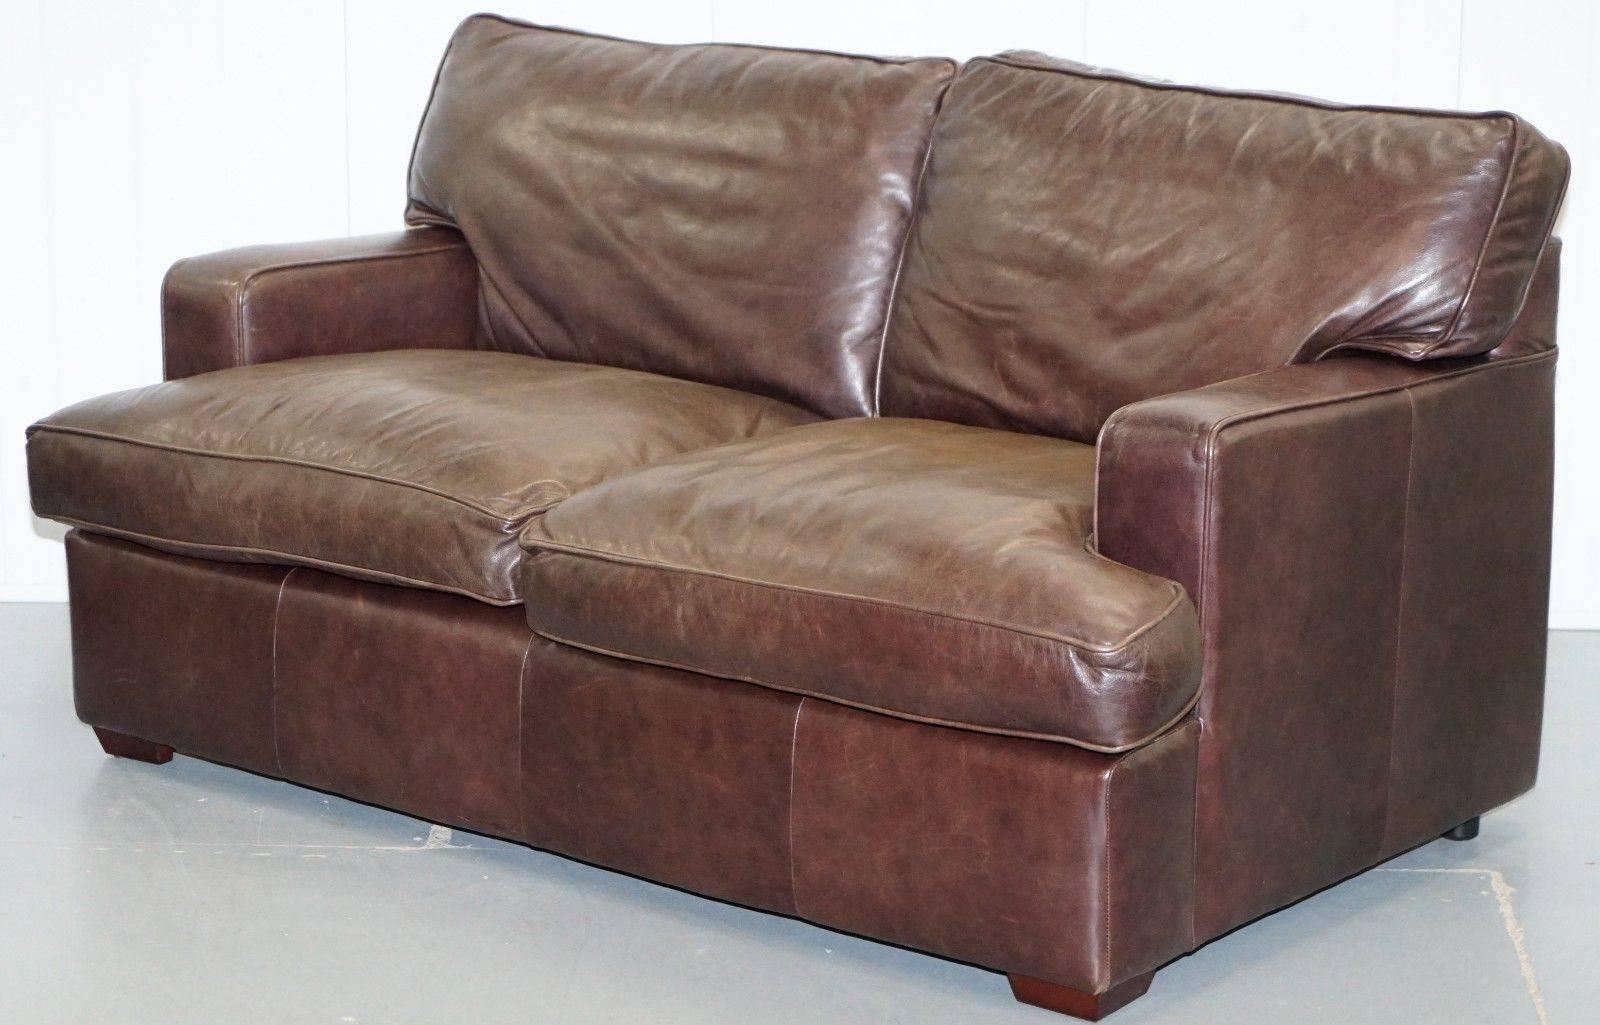 We are delighted to offer for sale this lovely Heritage brown 100% cattle hide leather Laura Ashley Mitcham two seater sofa RRP £2199

This is one of Laura Ashley’s most practical and comfortable sofas, its good quality heritage leather, very